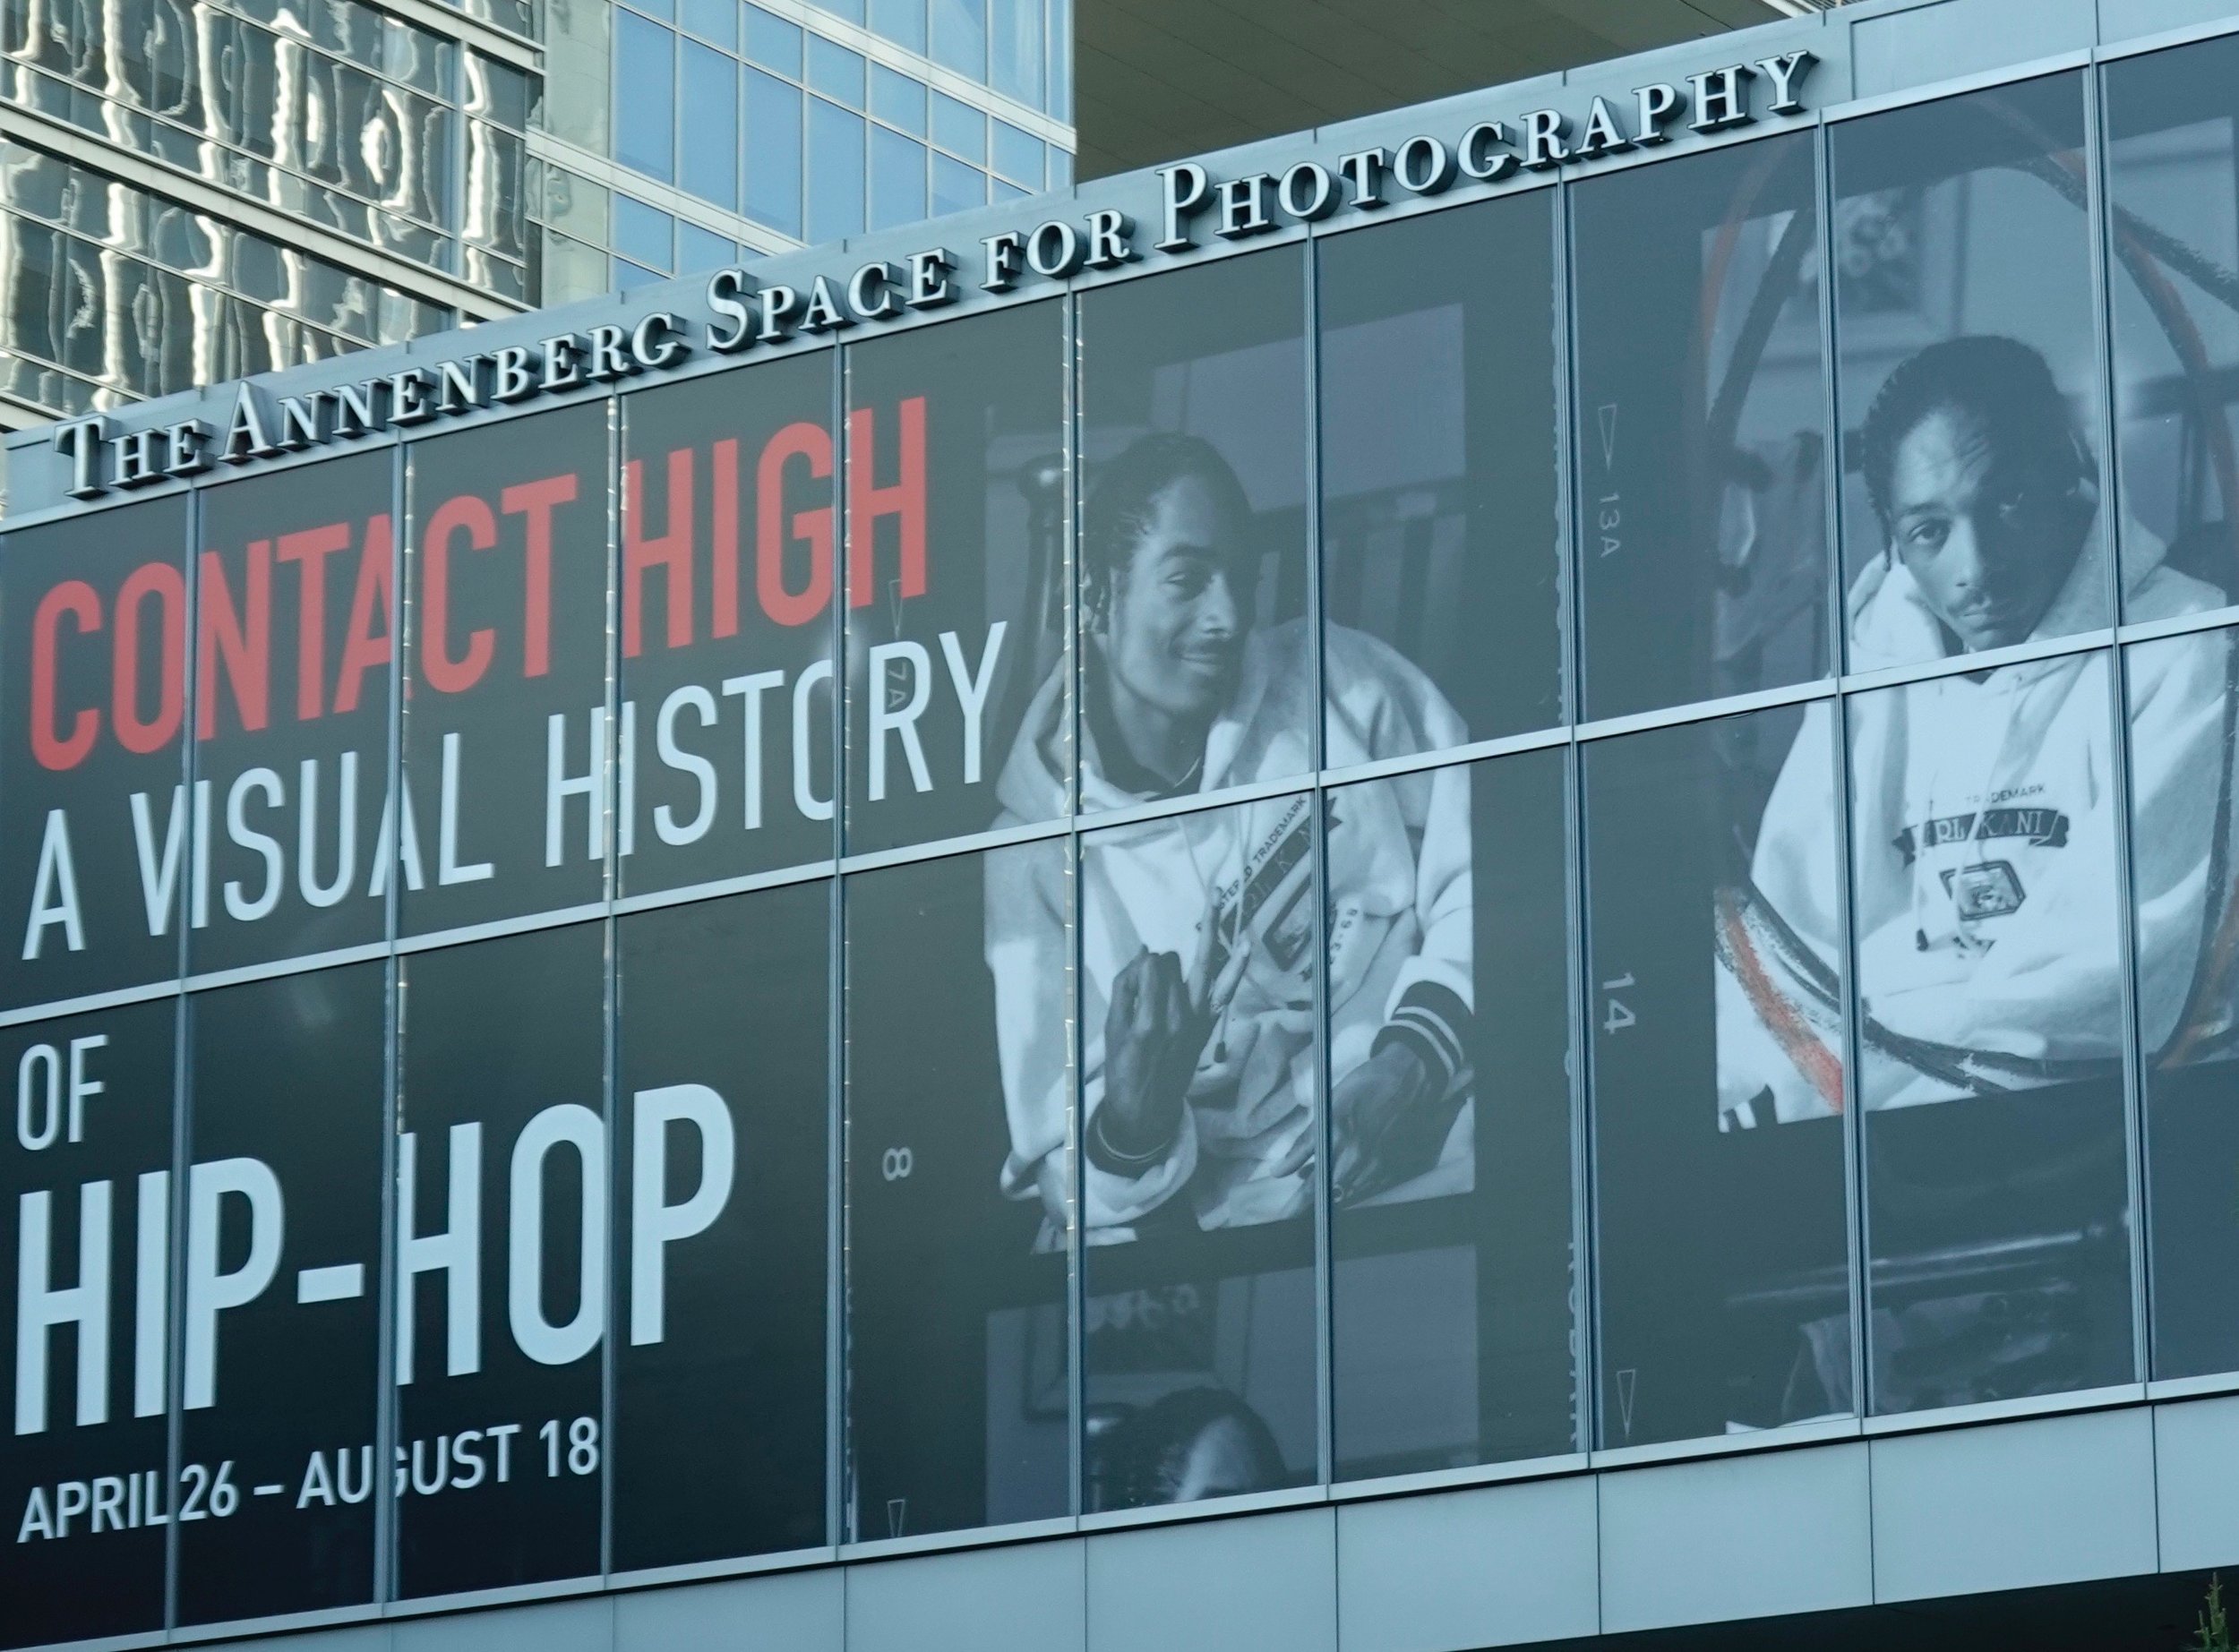 Contact High: A Visual History of Hip-Hop at Annenberg Space for Photography